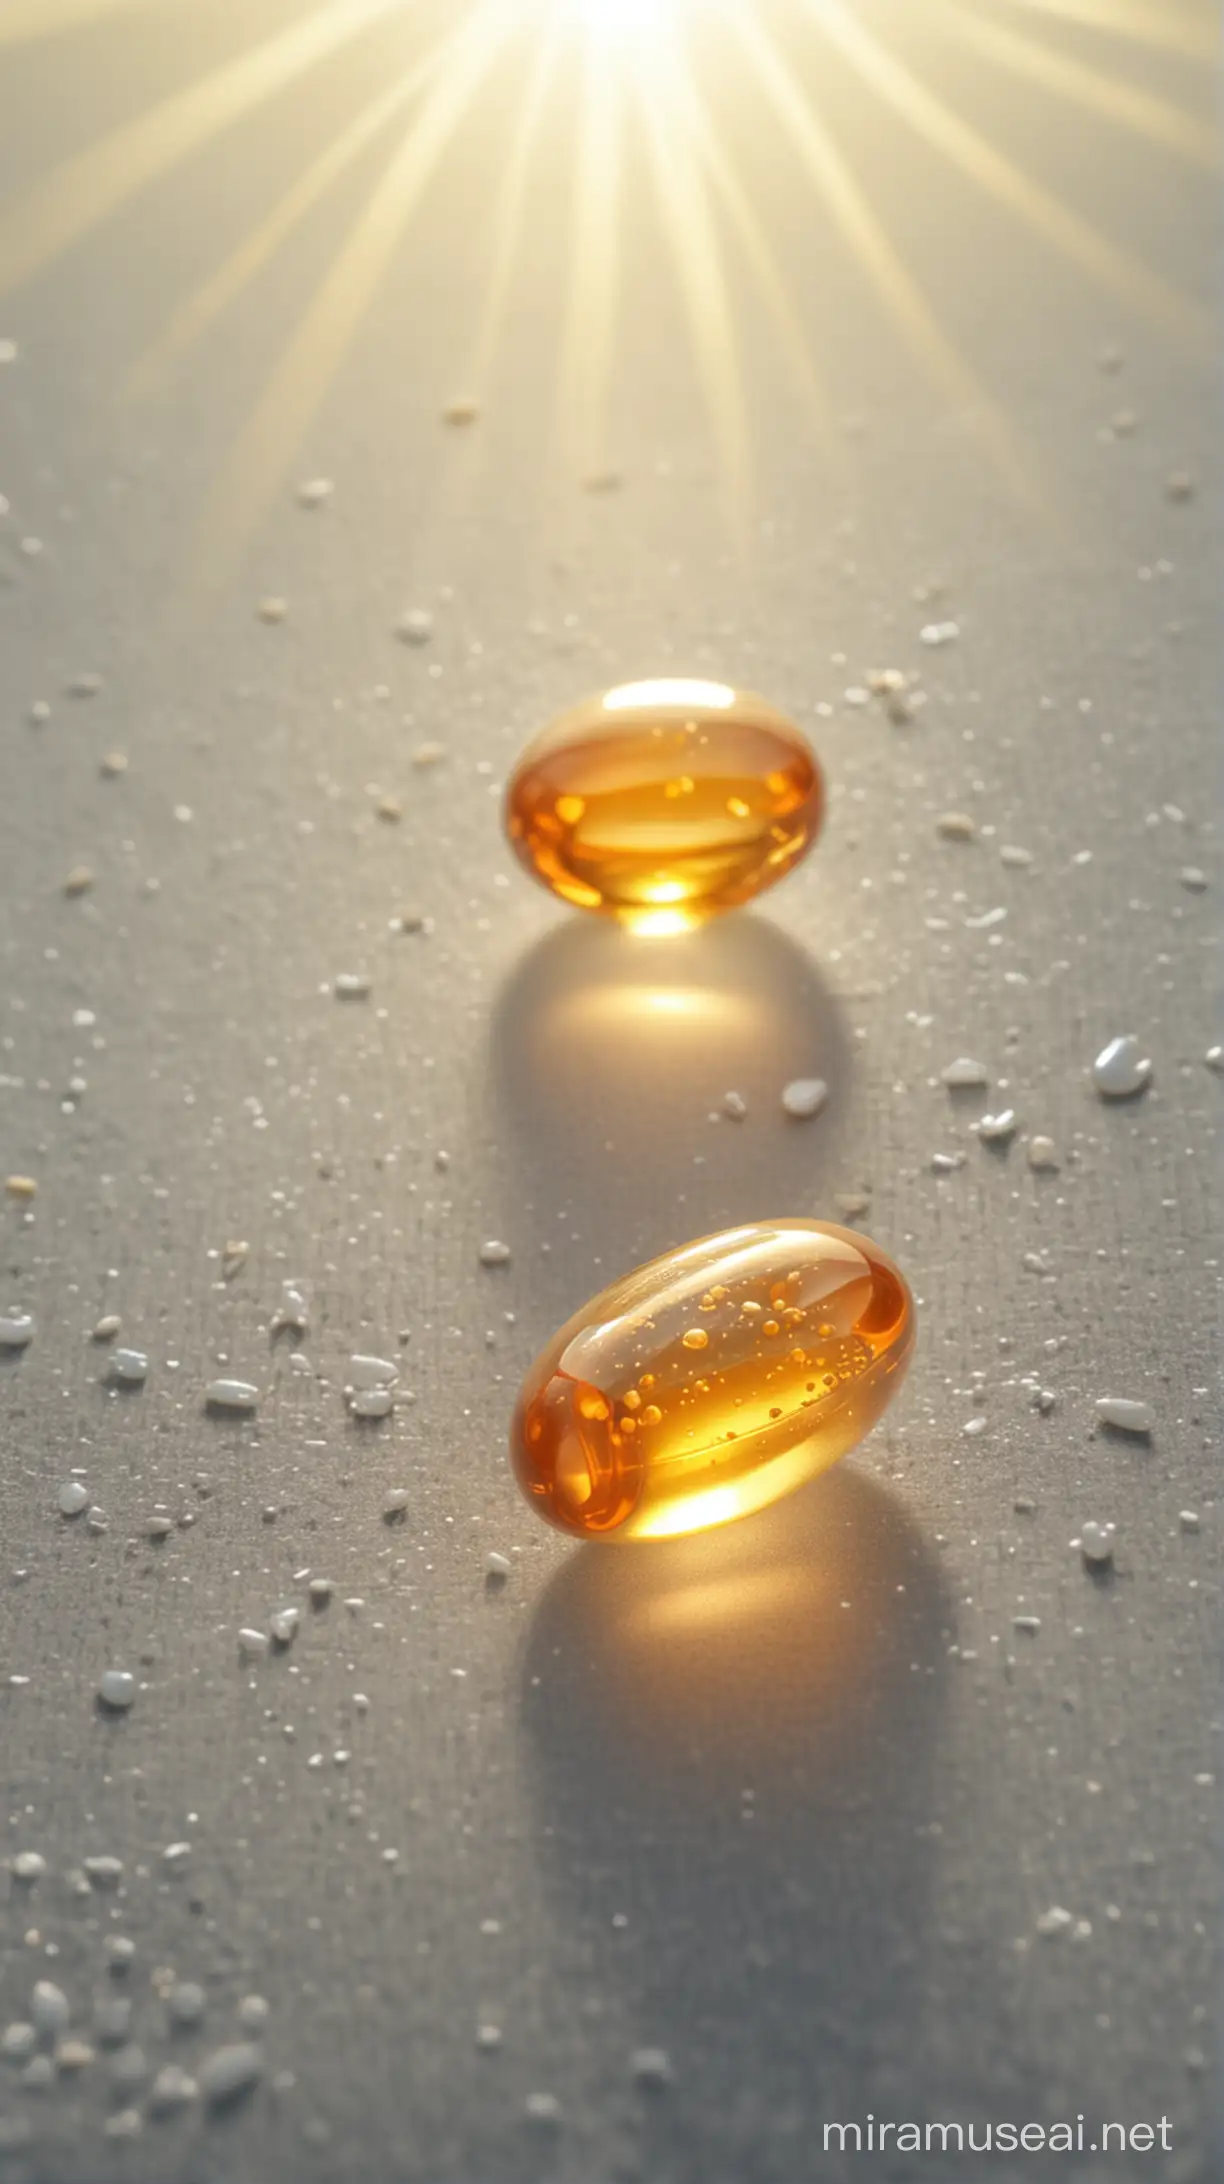 Vitamin D capsule, natural background, sun light effect, 4k, HDR, morning time weather